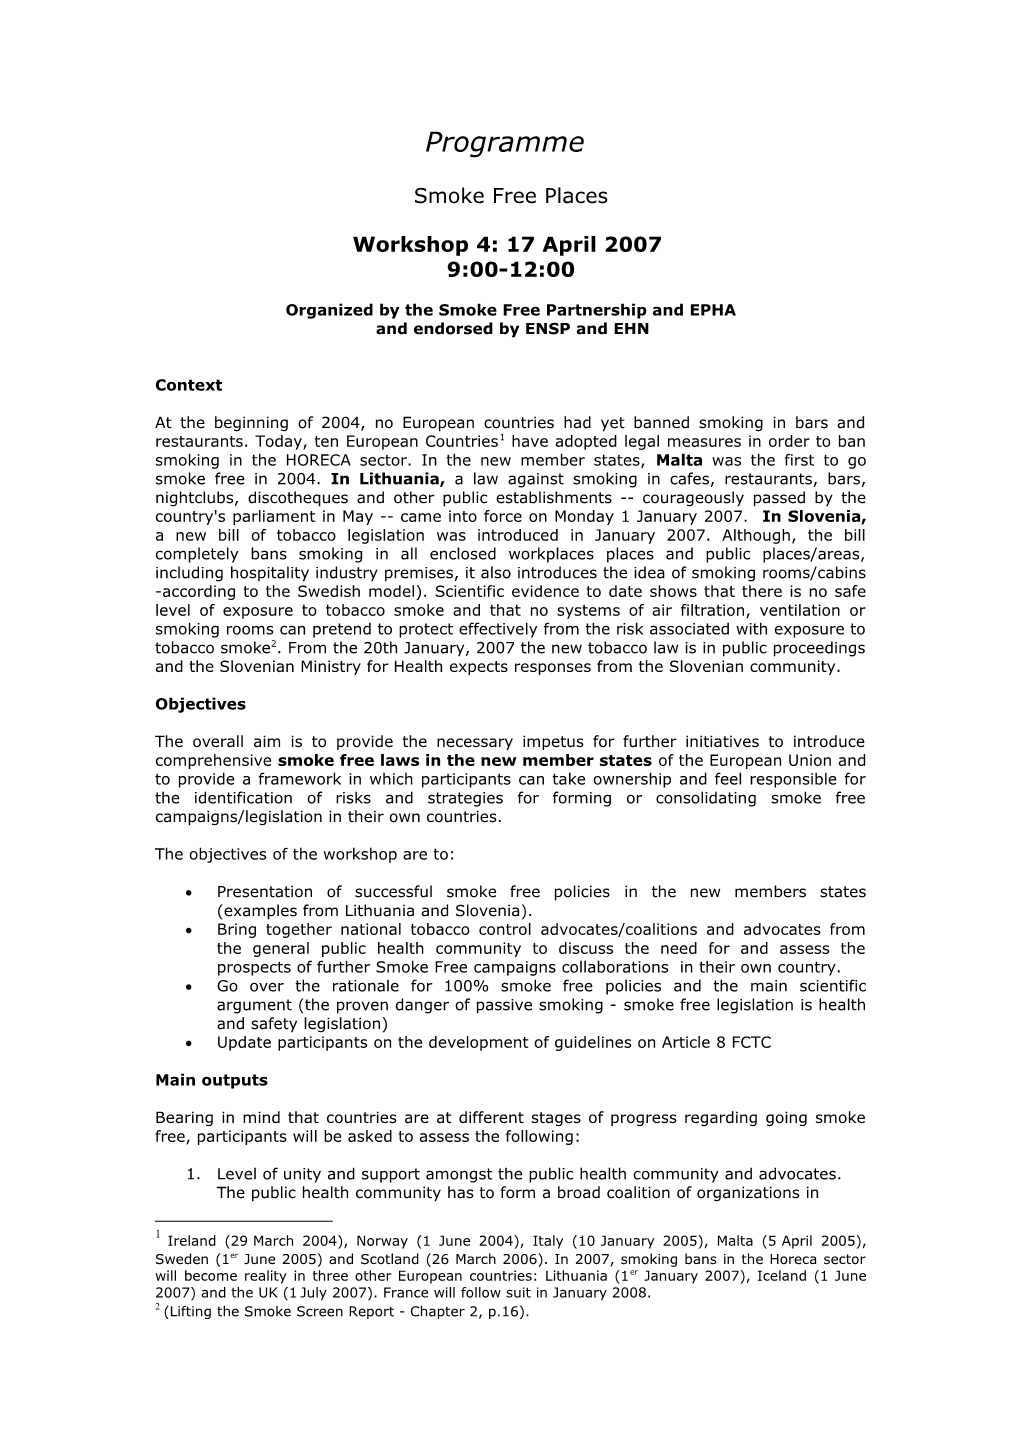 Draft Proposal for a Seminar on Tobacco and Nicotine Product Regulation in the EU